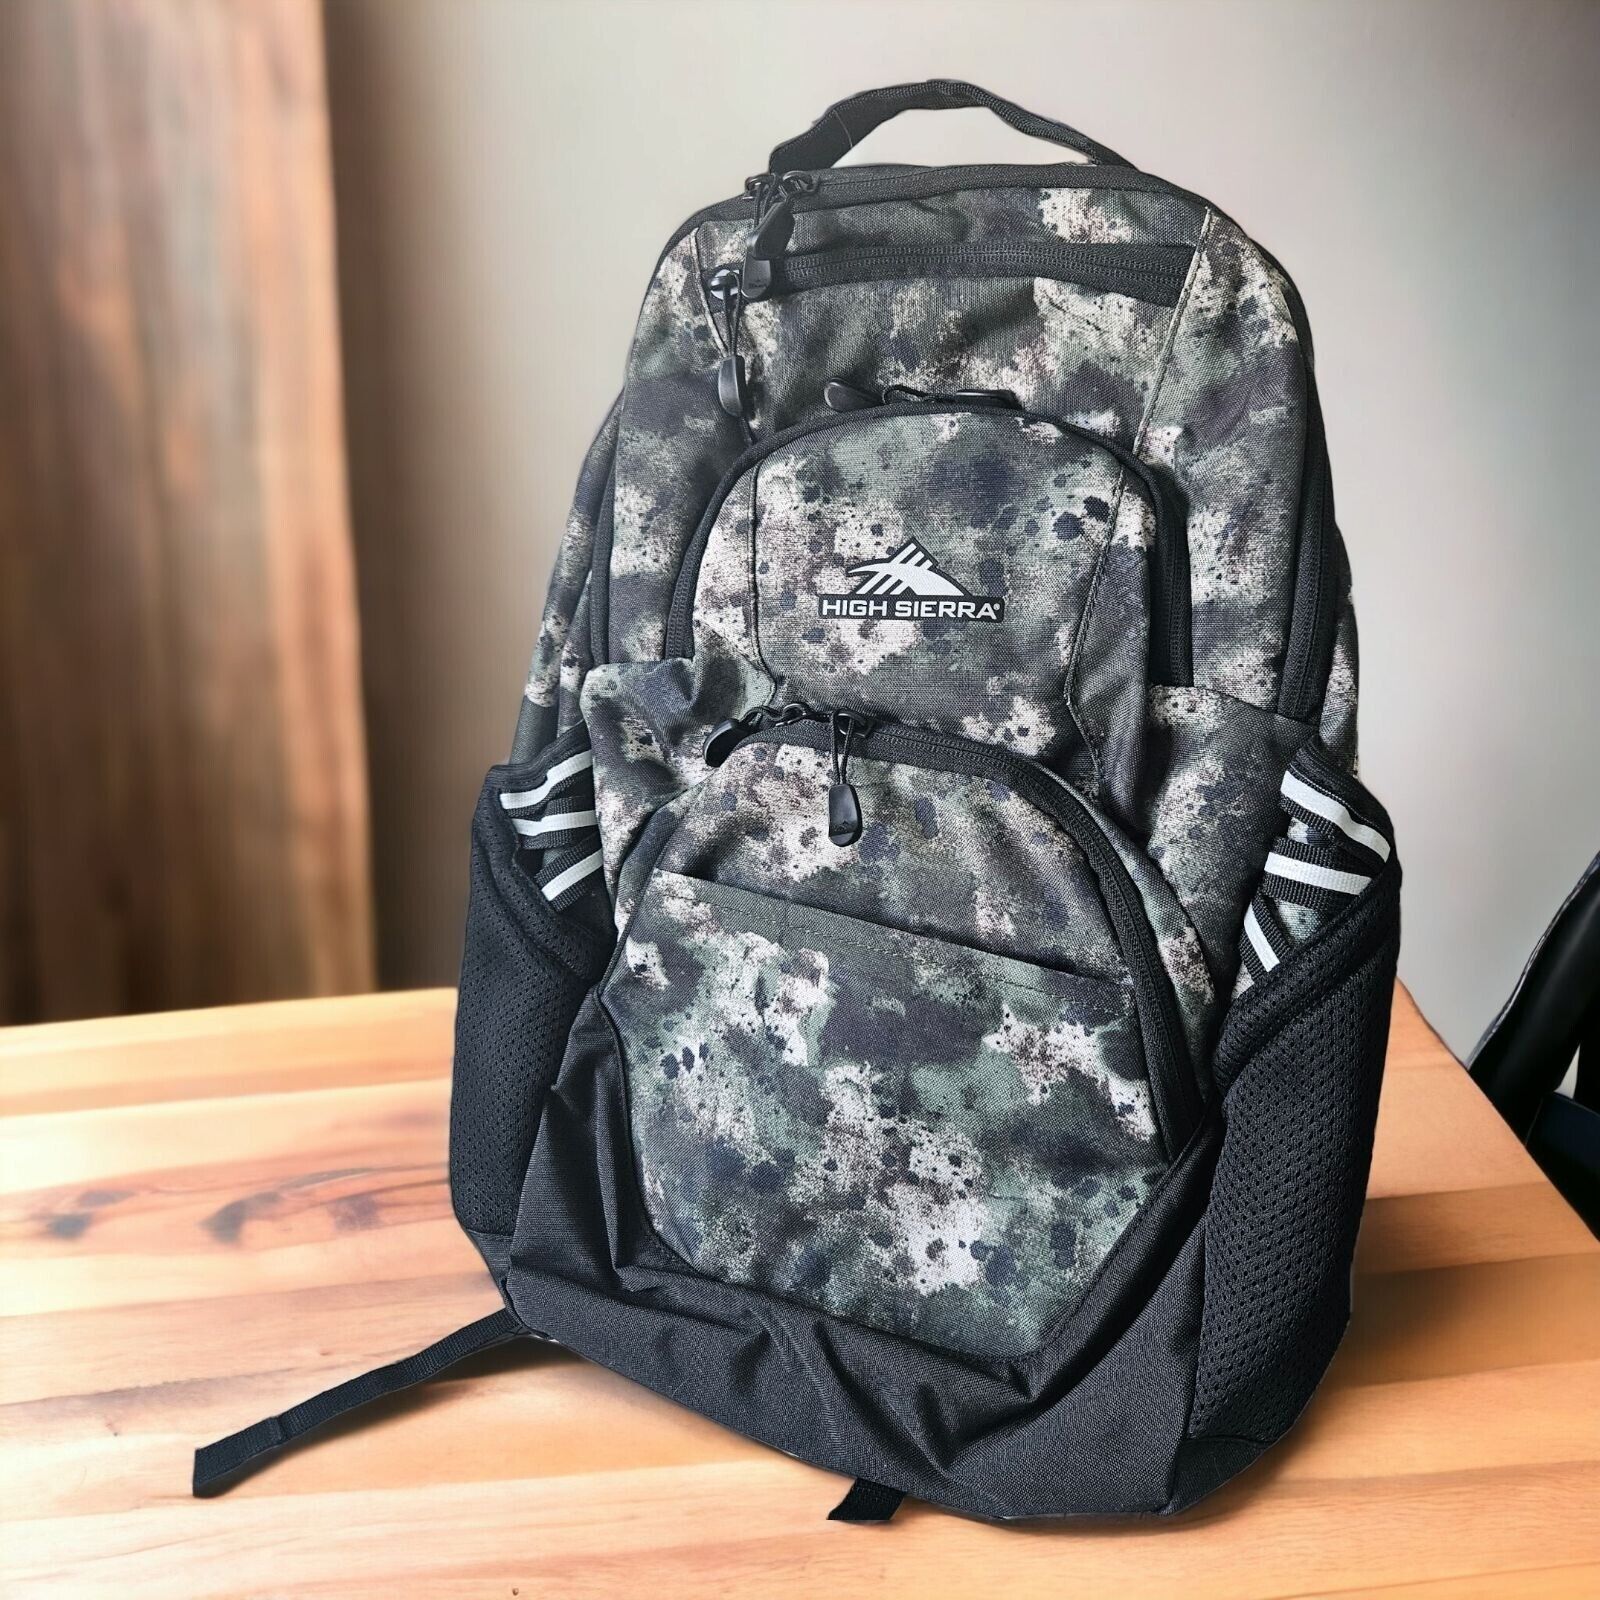 High Sierra Swoop SG Backpack 17" Laptop Pocket, Camo New w/tags - $47.41